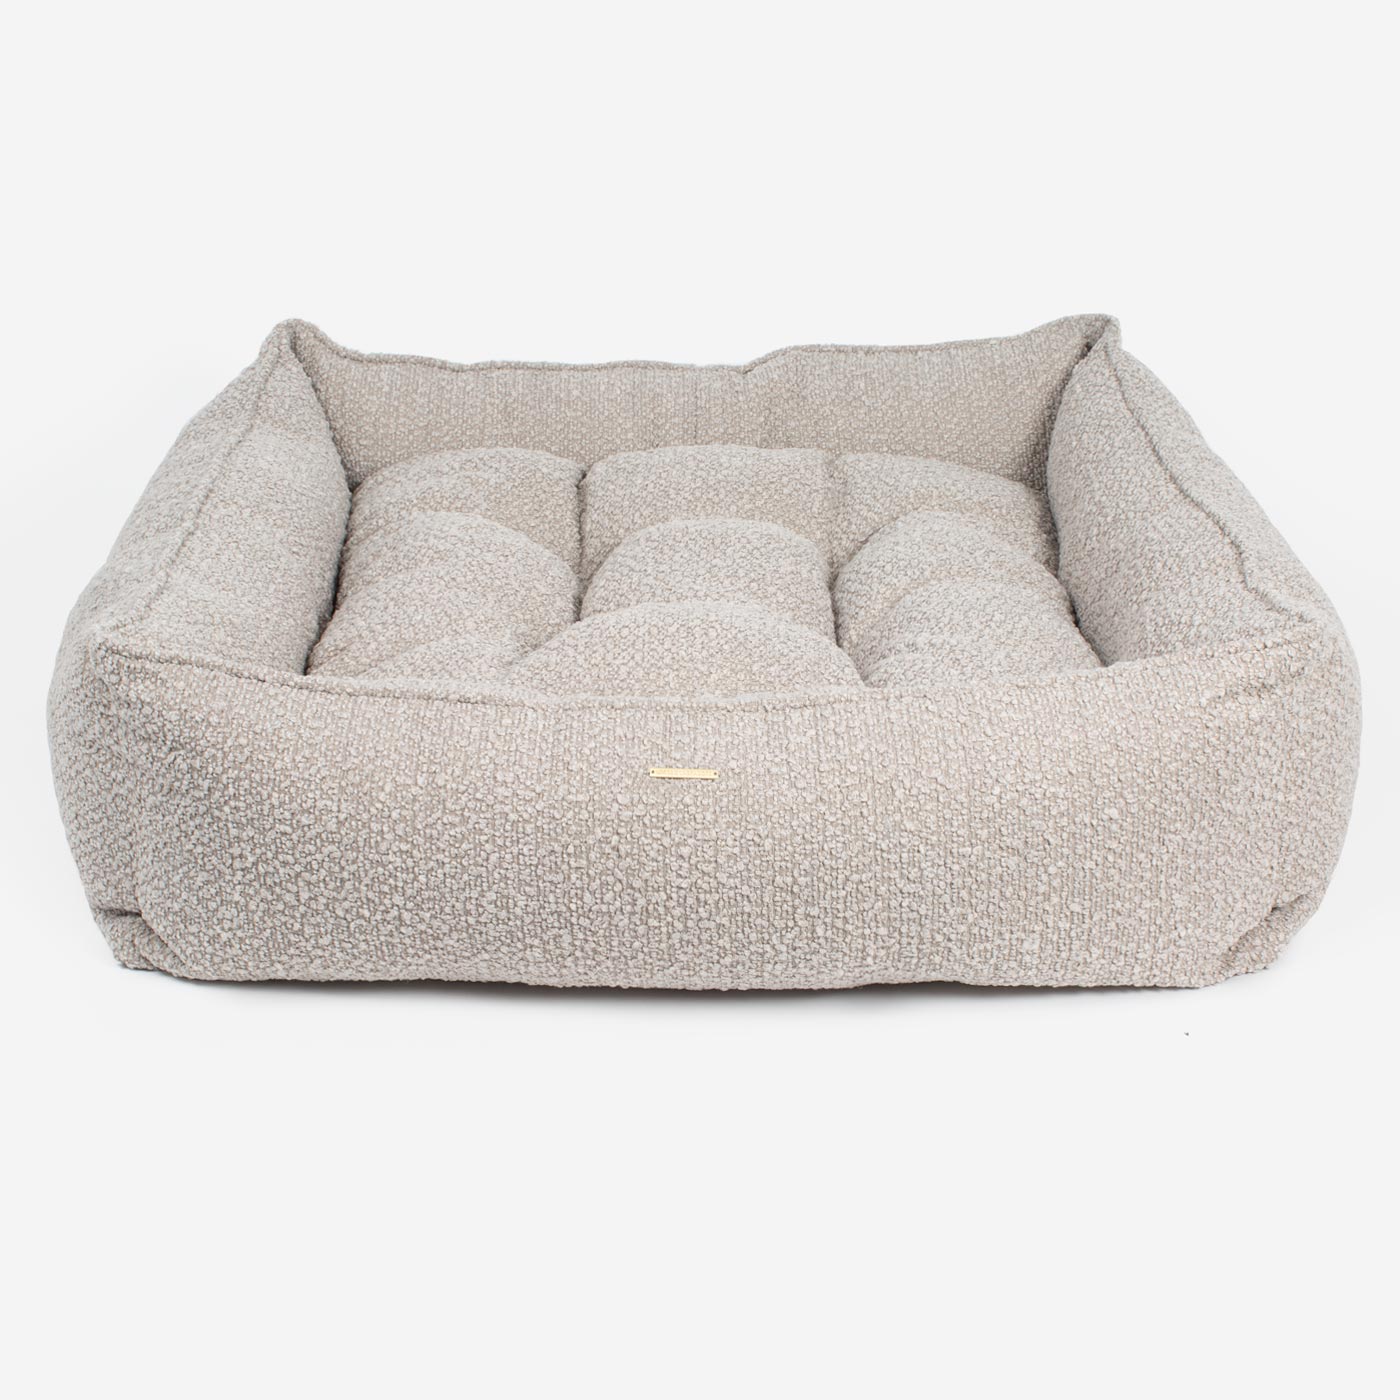 [cLuxury Handmade Box Bed For Dogs in Mink Boucle, Perfect For Your Pets Nap Time! Available To Personalise at Lords & Labradors